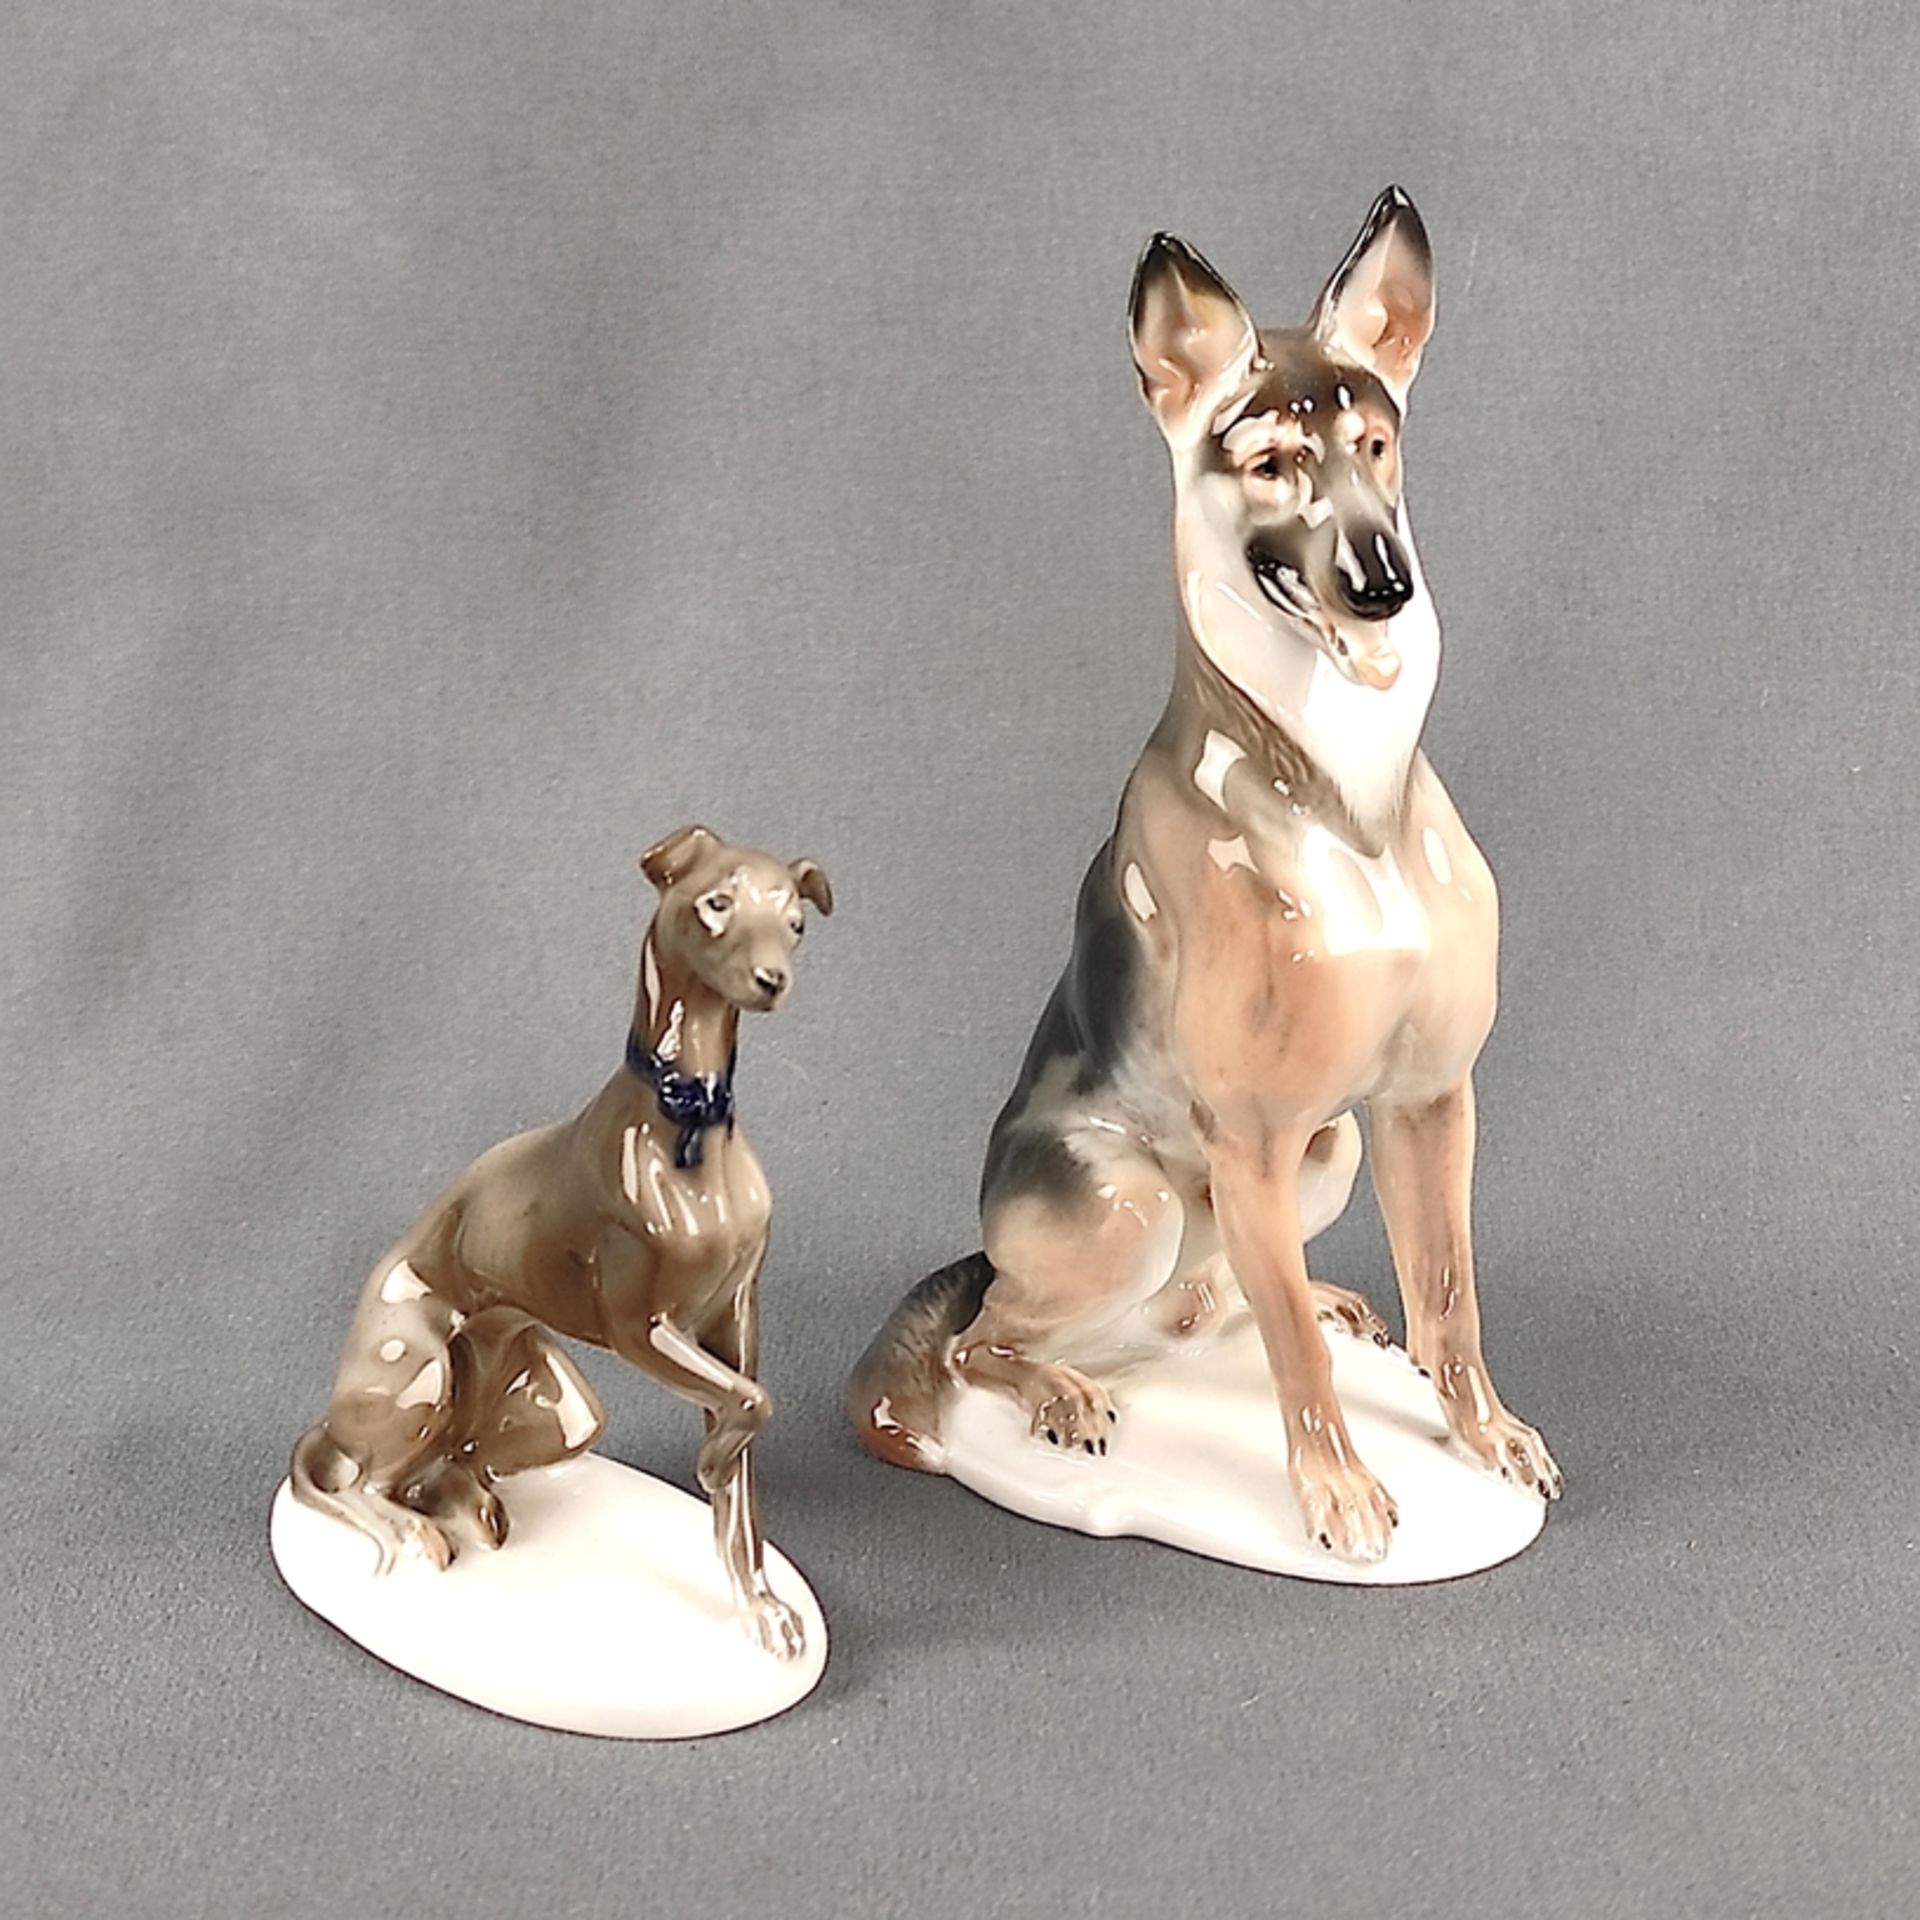 Dog convolute consisting of: "Sitting shepherd dog", polychrome painted on natural plinth, design b